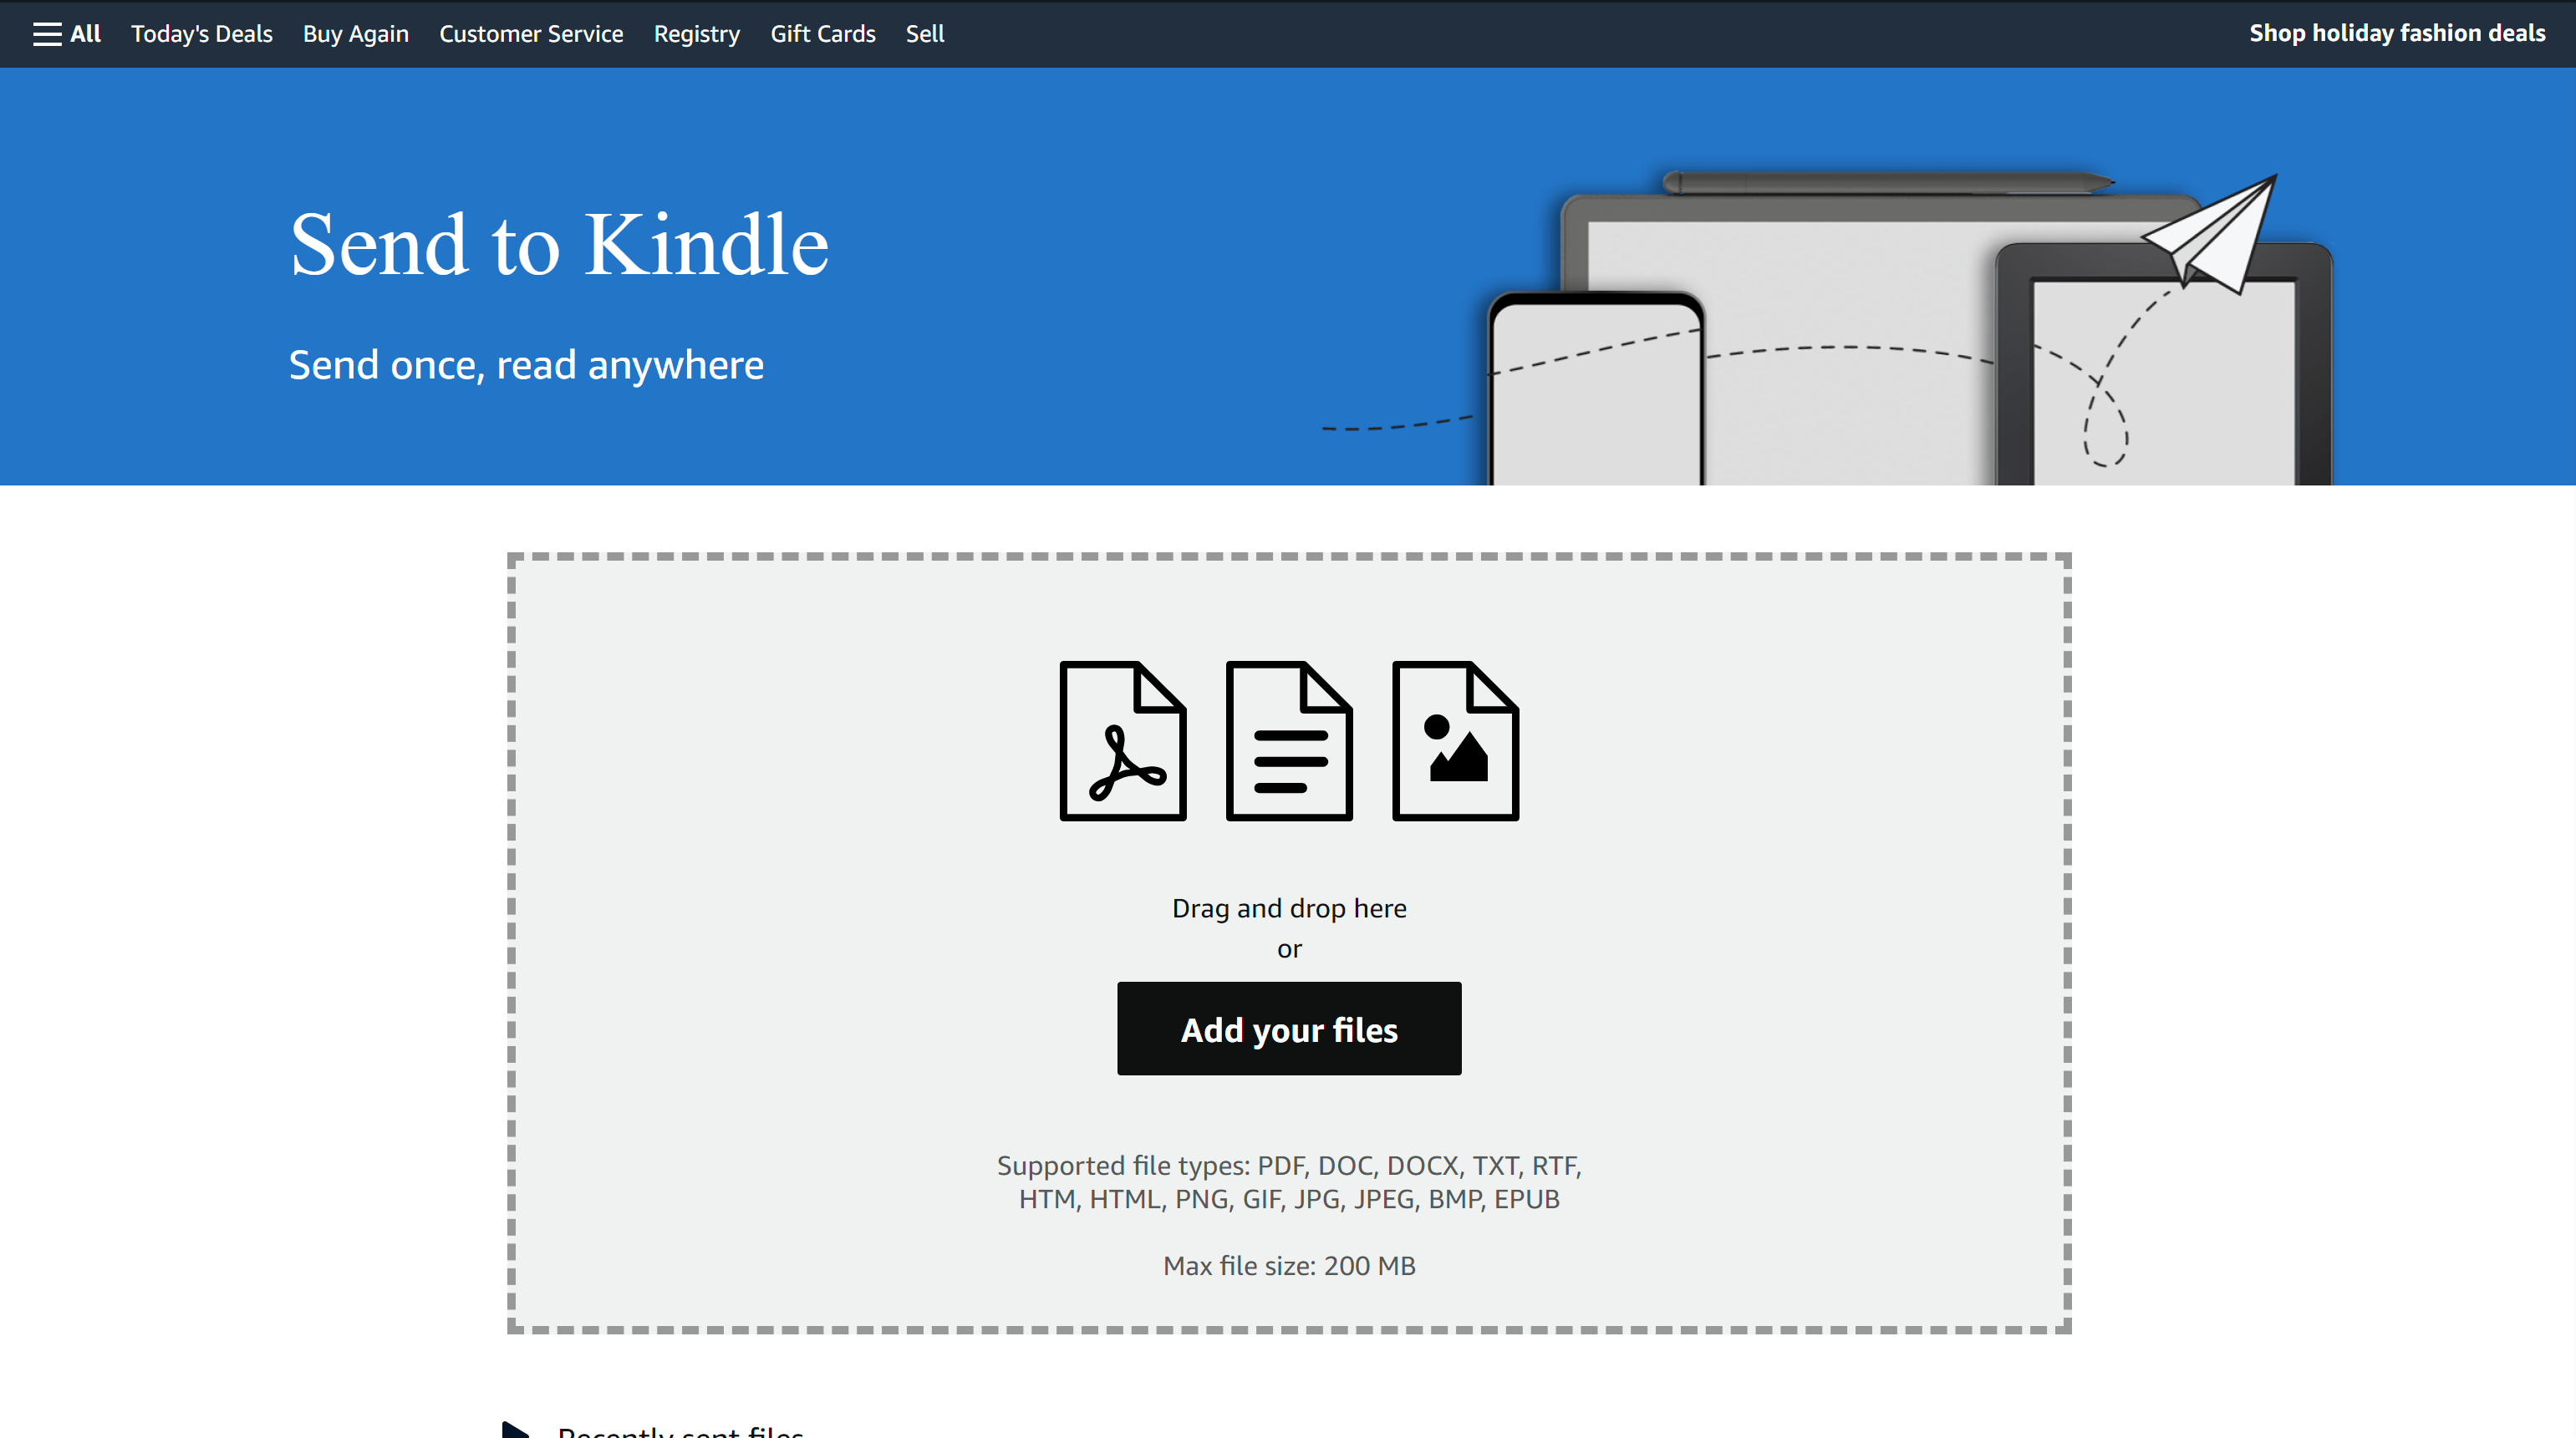 Go to the Send to Kindle site